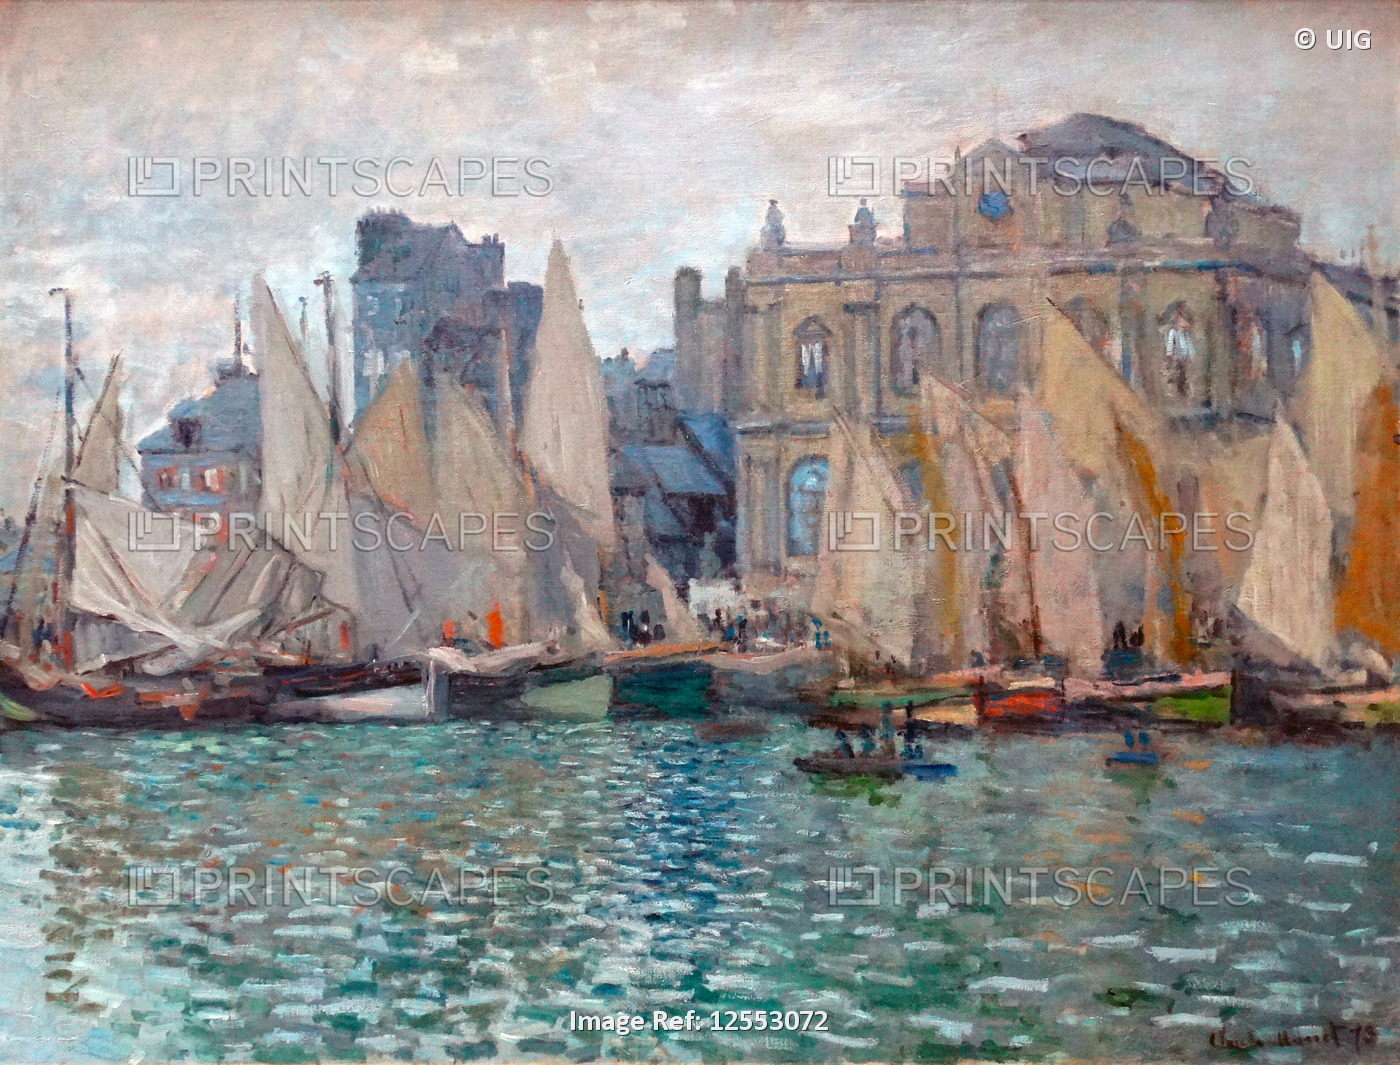 Painting titled 'The Museum at Le Harve' by Claude Monet, dated 1873